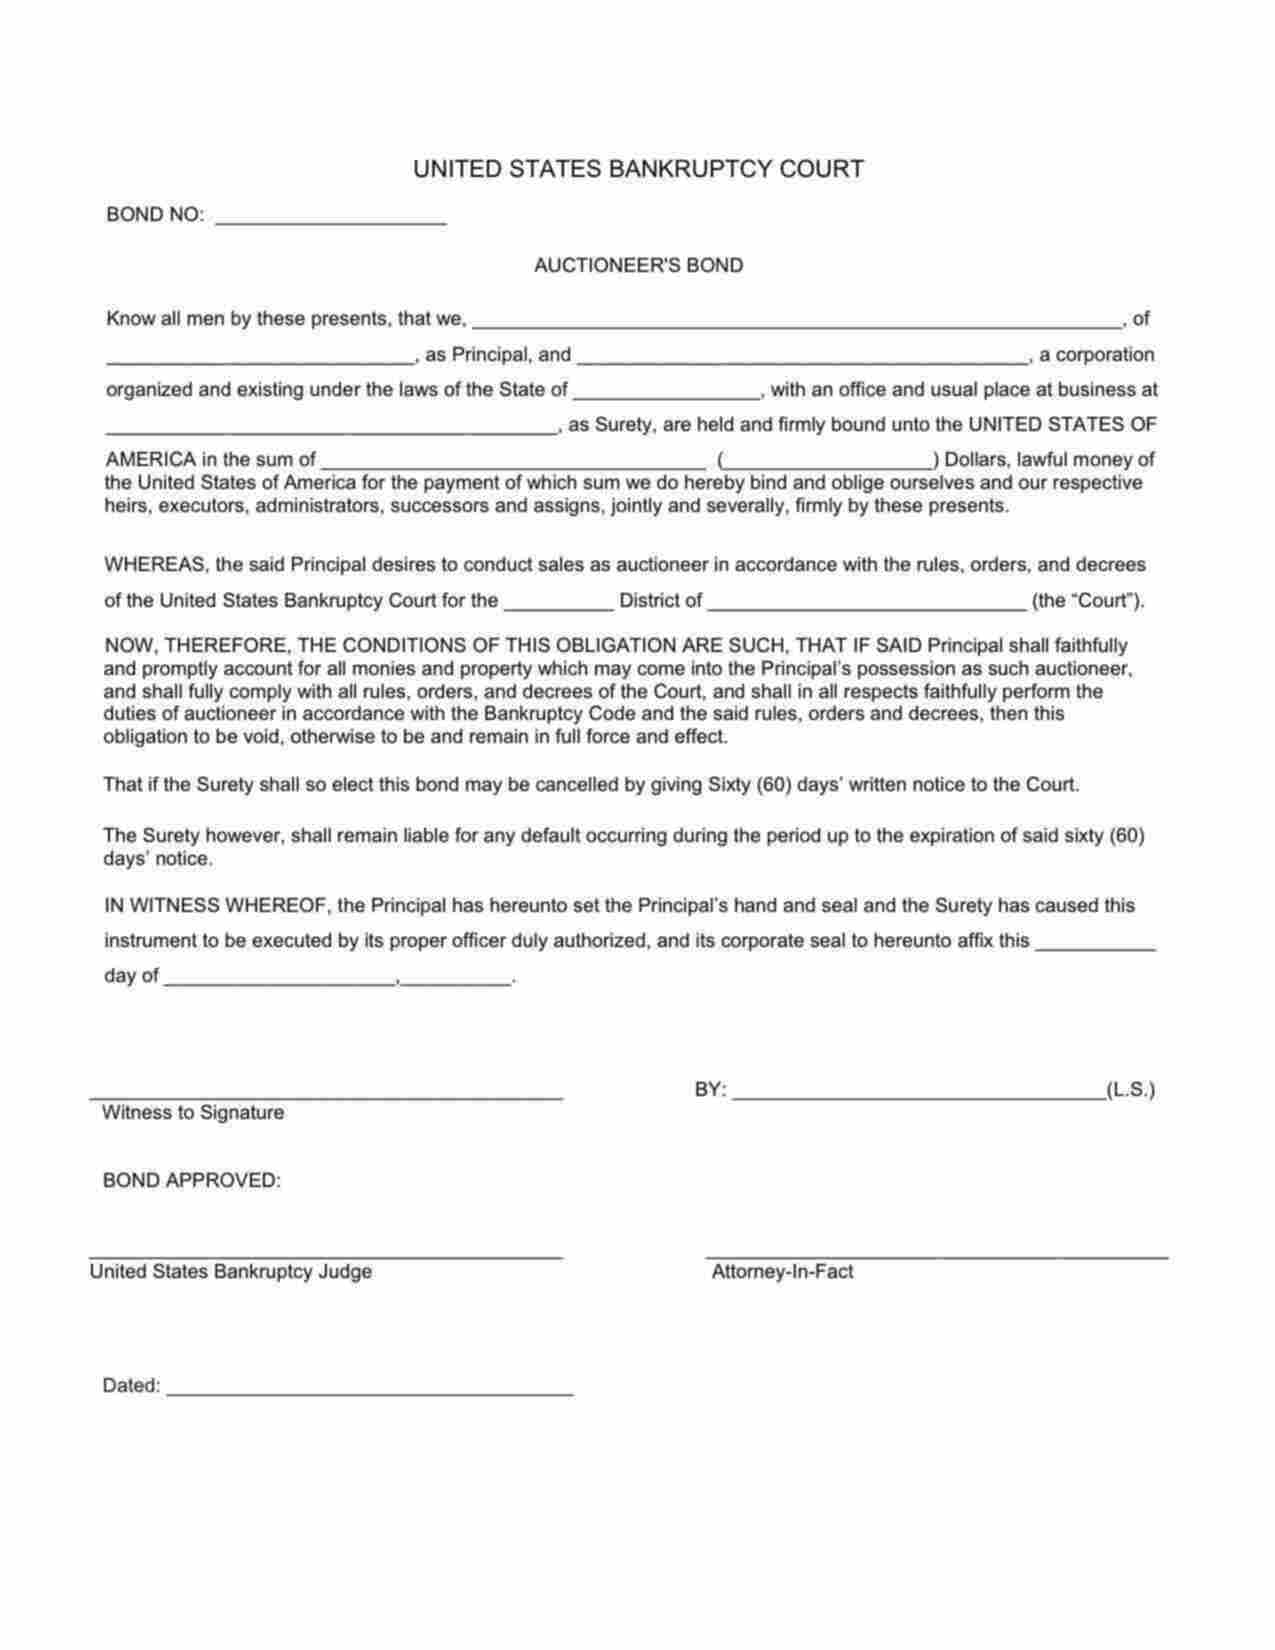 Federal Auctioneer Bond Form